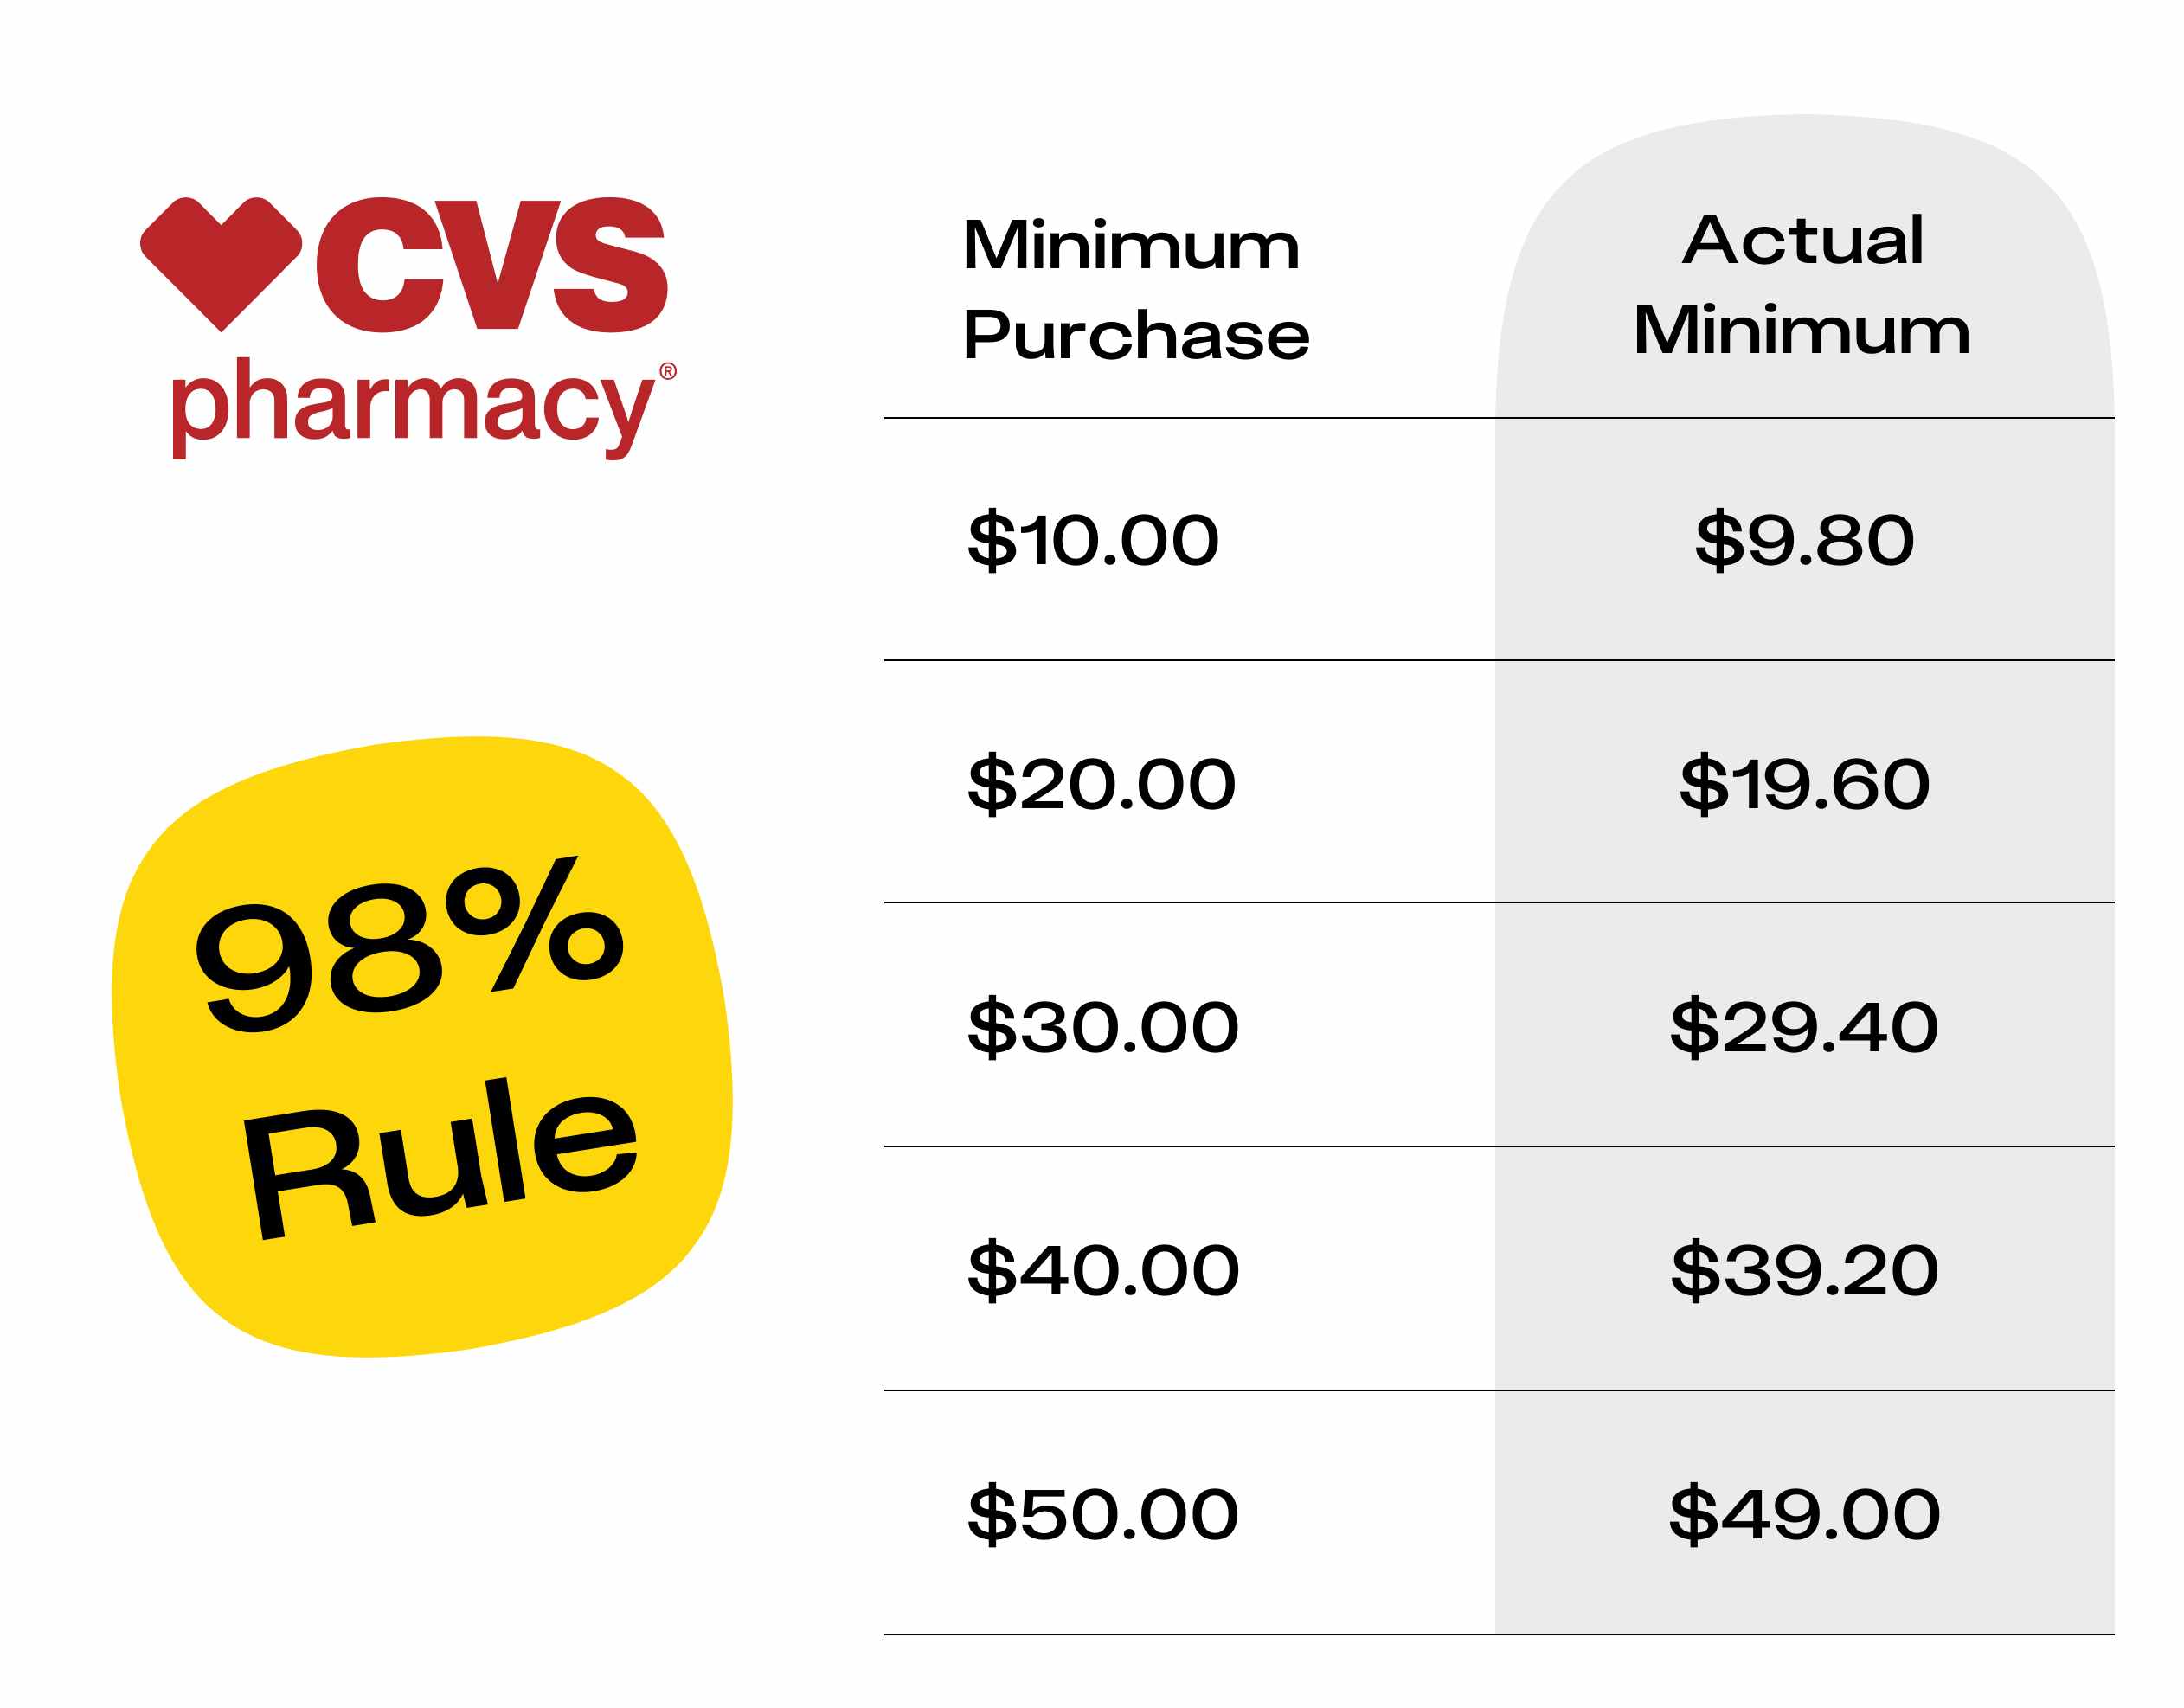 The CVS 98% rule lets you spend 98 percent of the required amount and still earn ExtraBucks.